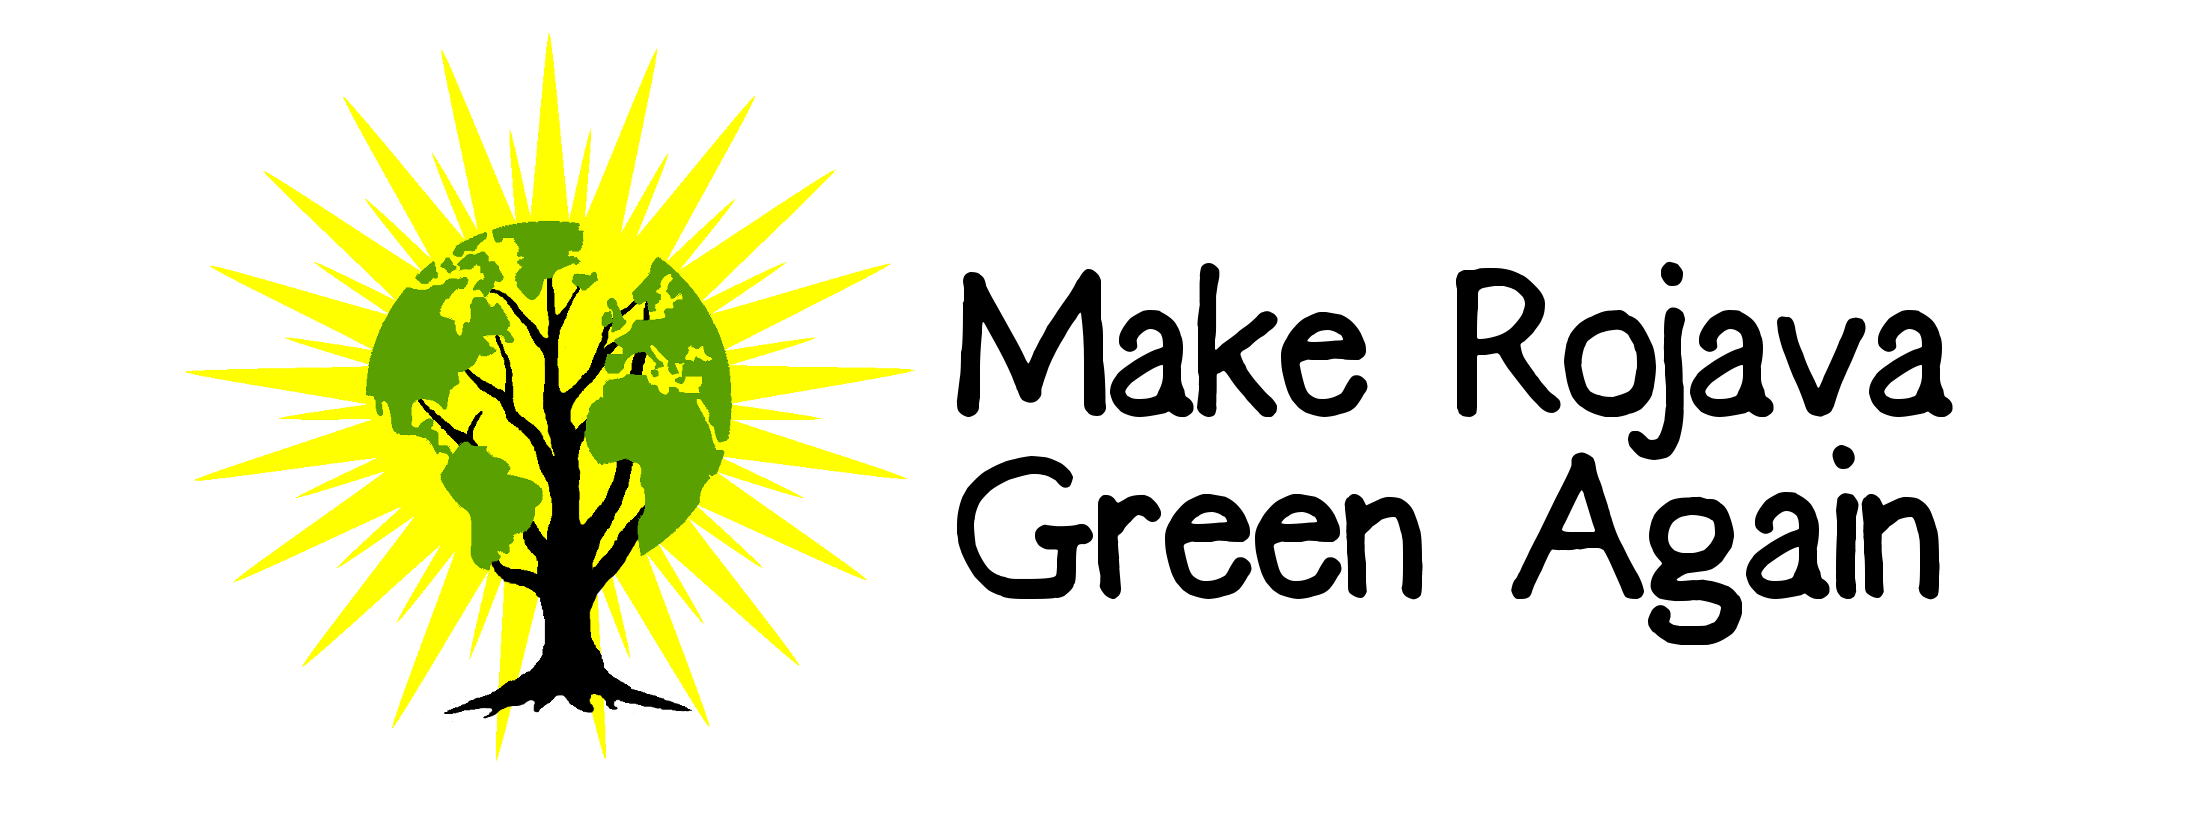 Make Rojava Green Again! Support the ecological revolution in Northern Syria